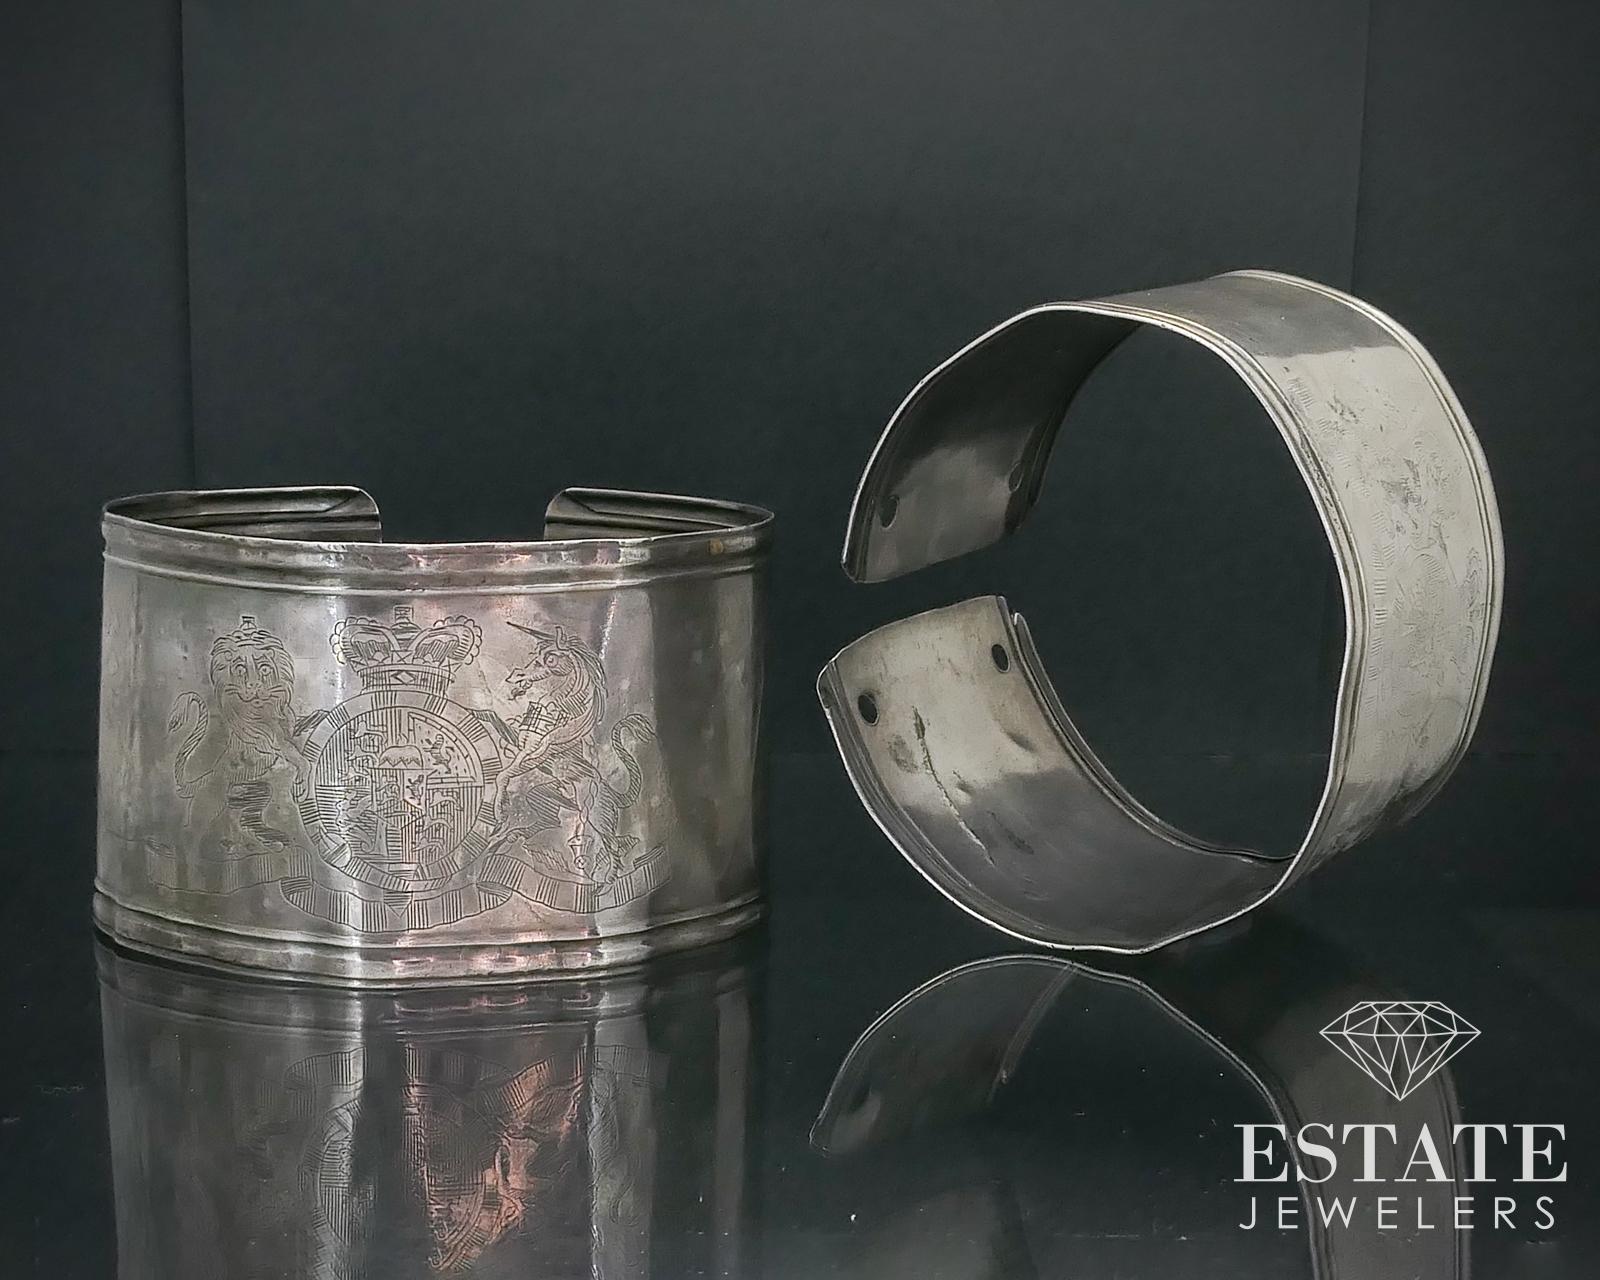 Rare collectible Native American arm bands made from sterling silver by the English Silversmith William Bateman. He is the grandson of the famed silversmith Hester Bateman. That family, and shop, made intricate and collectible silver pieces from the